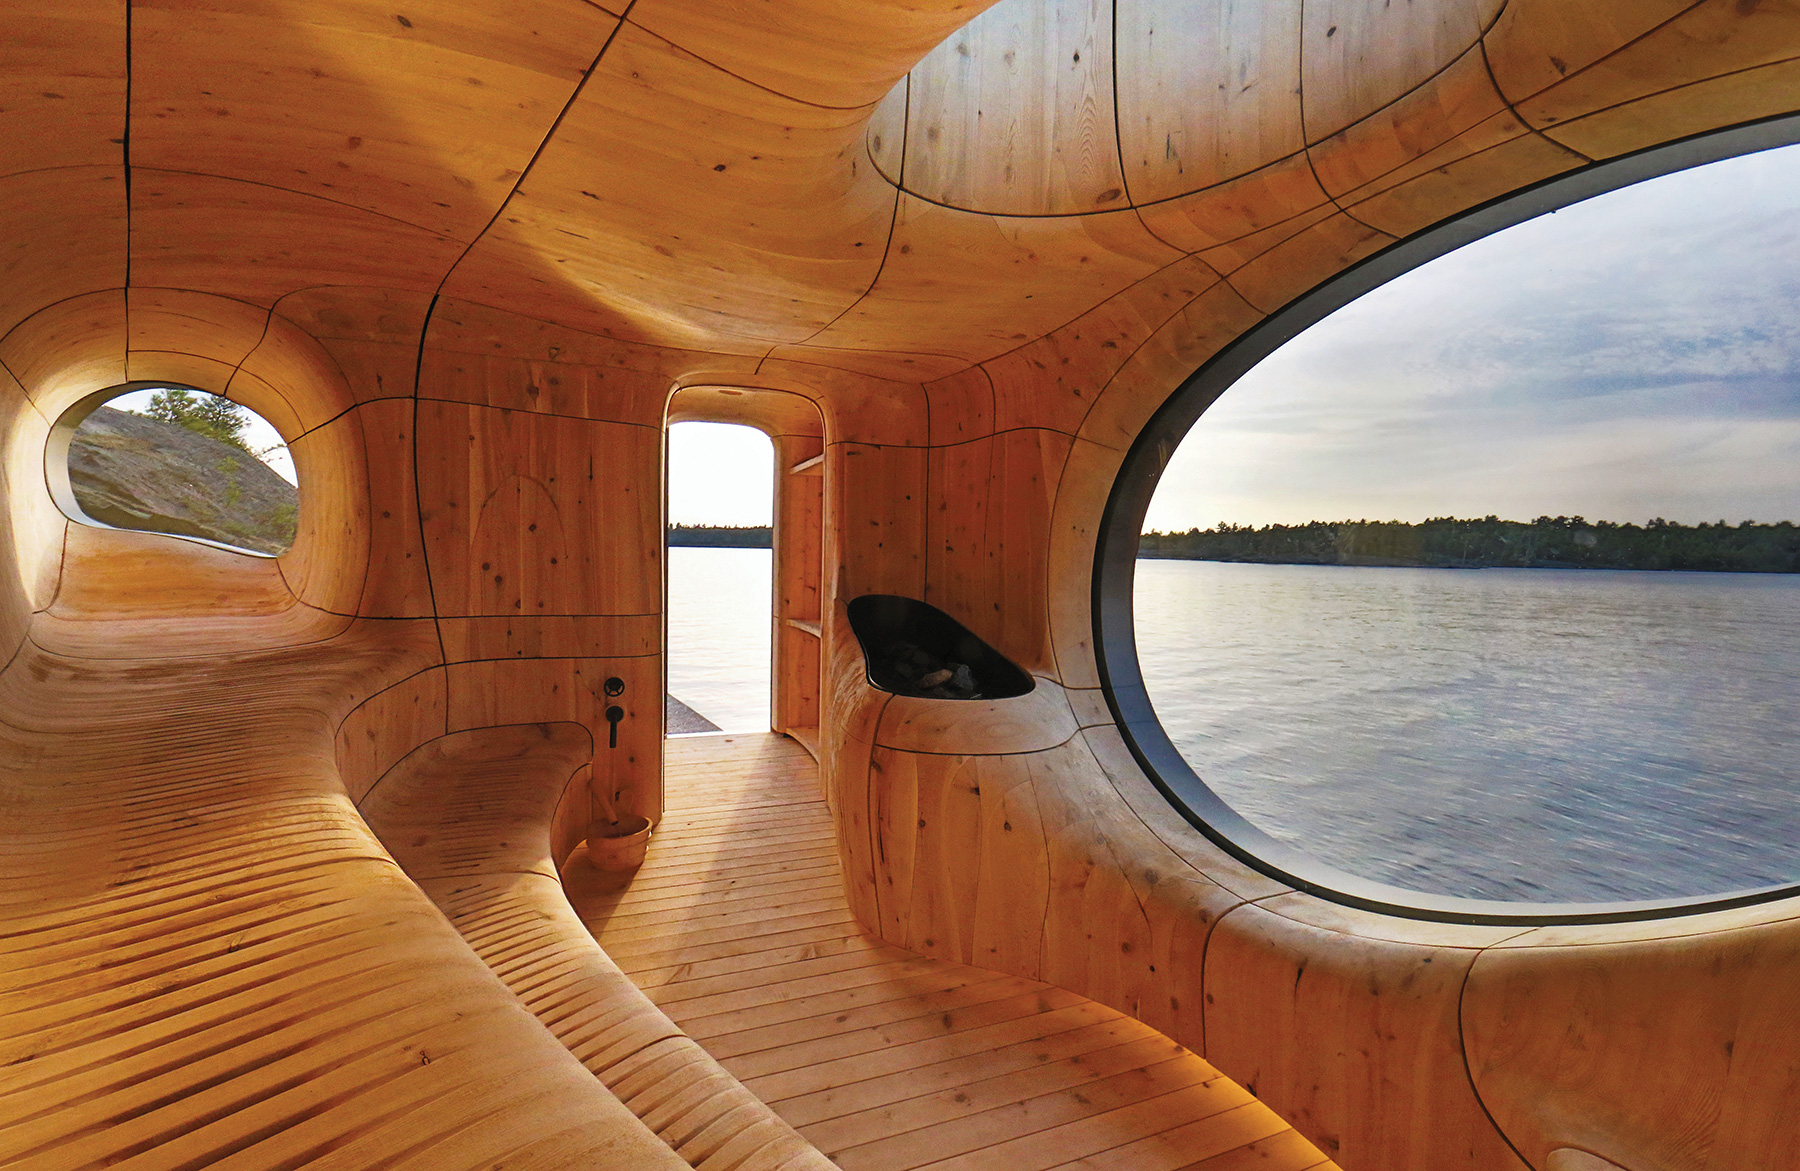 The health benefits of saunas are well-documented. And the aesthetics of the interior of this sauna on Georgian Bay just might help as well.